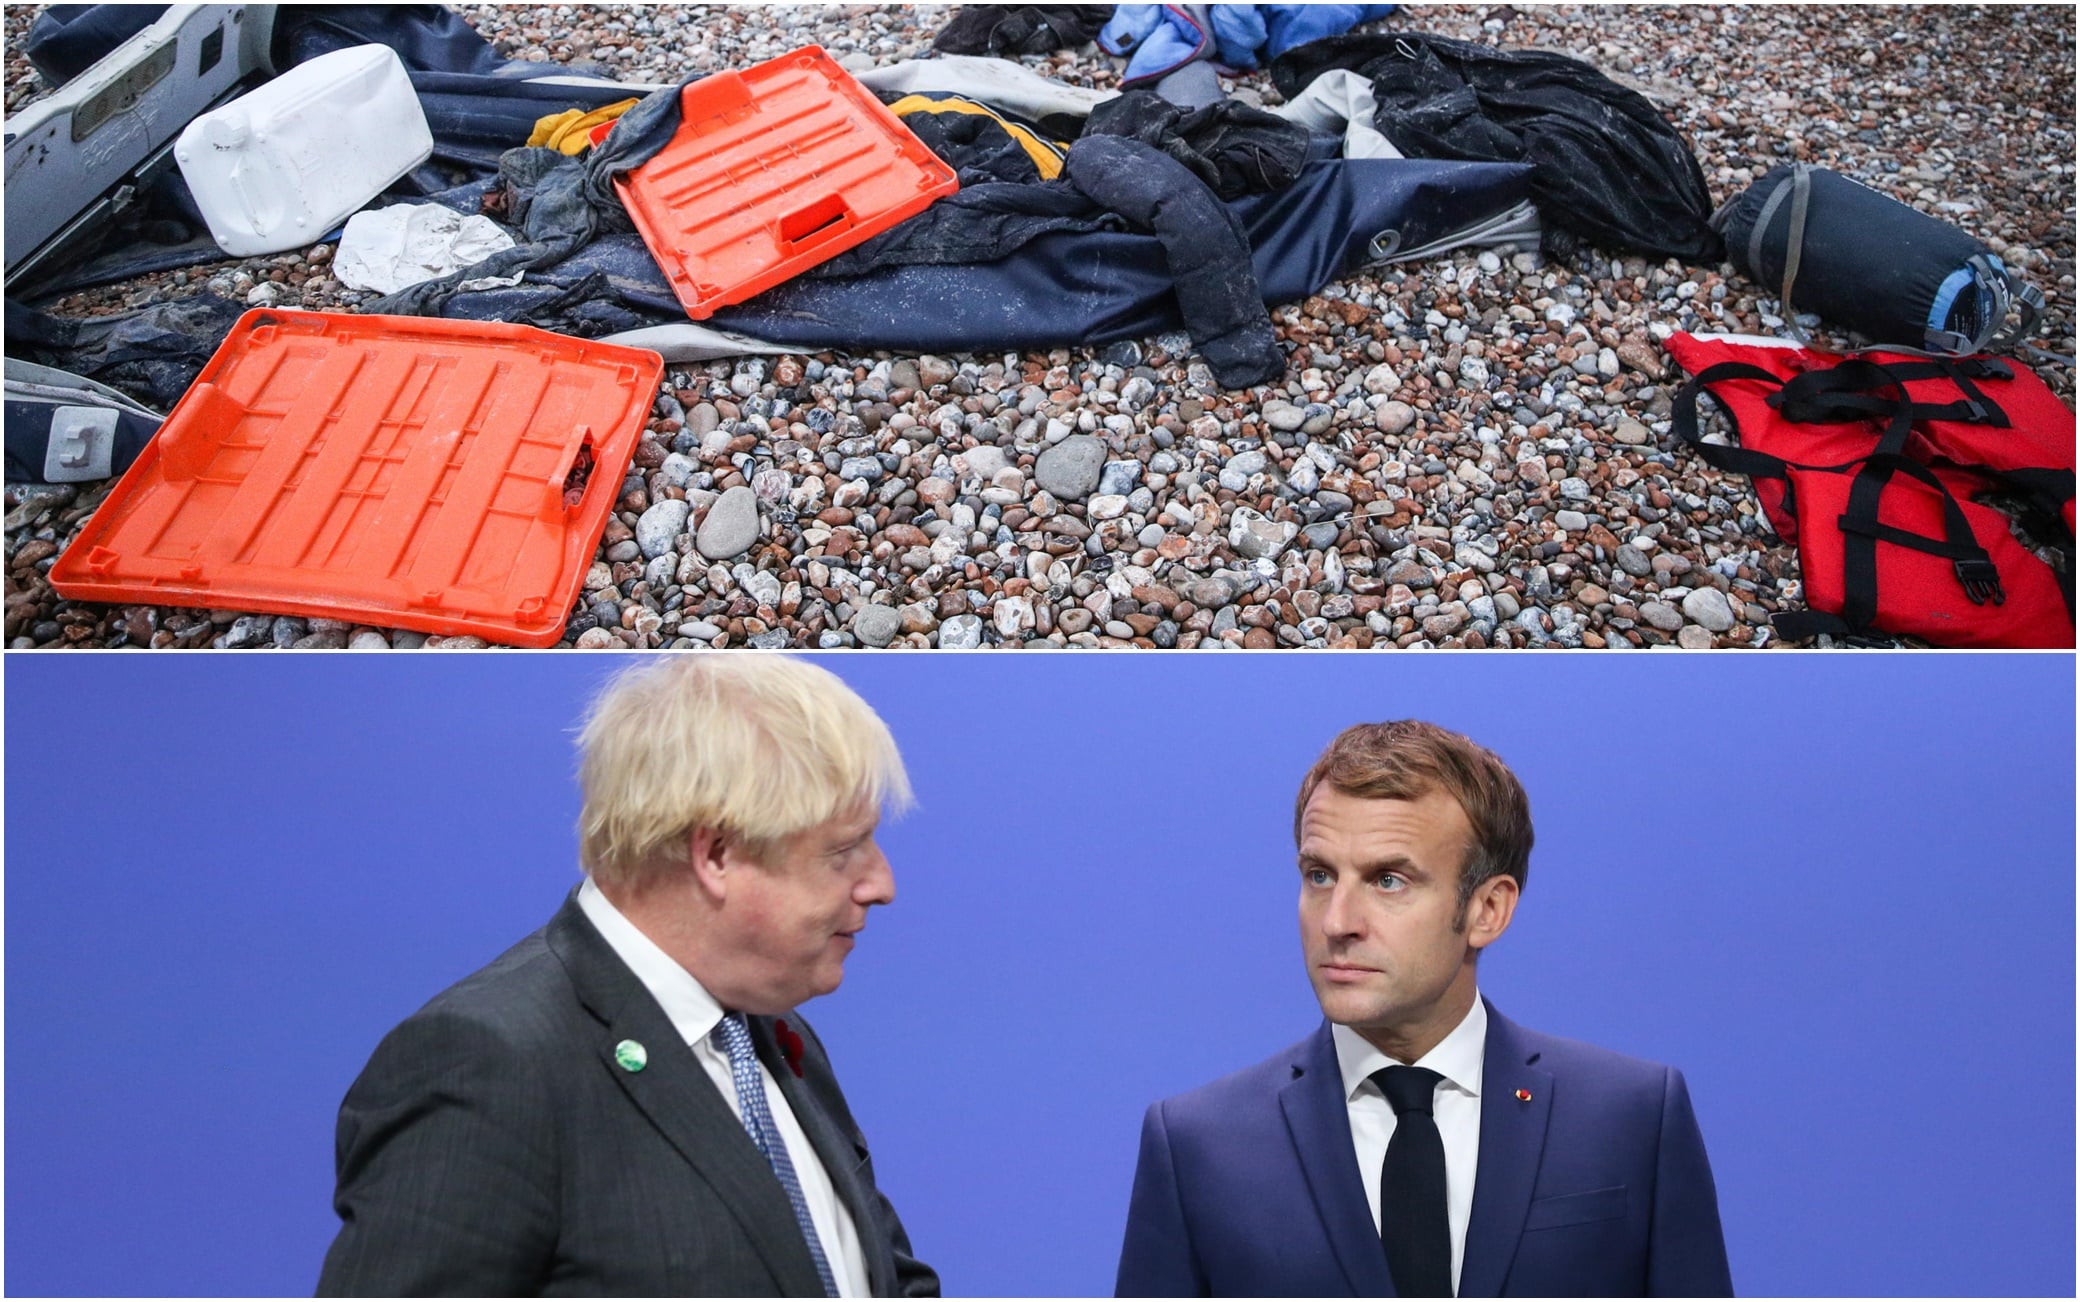 Manche, at least 27 dead in the shipwreck.  Johnson: France take back illegal migrants